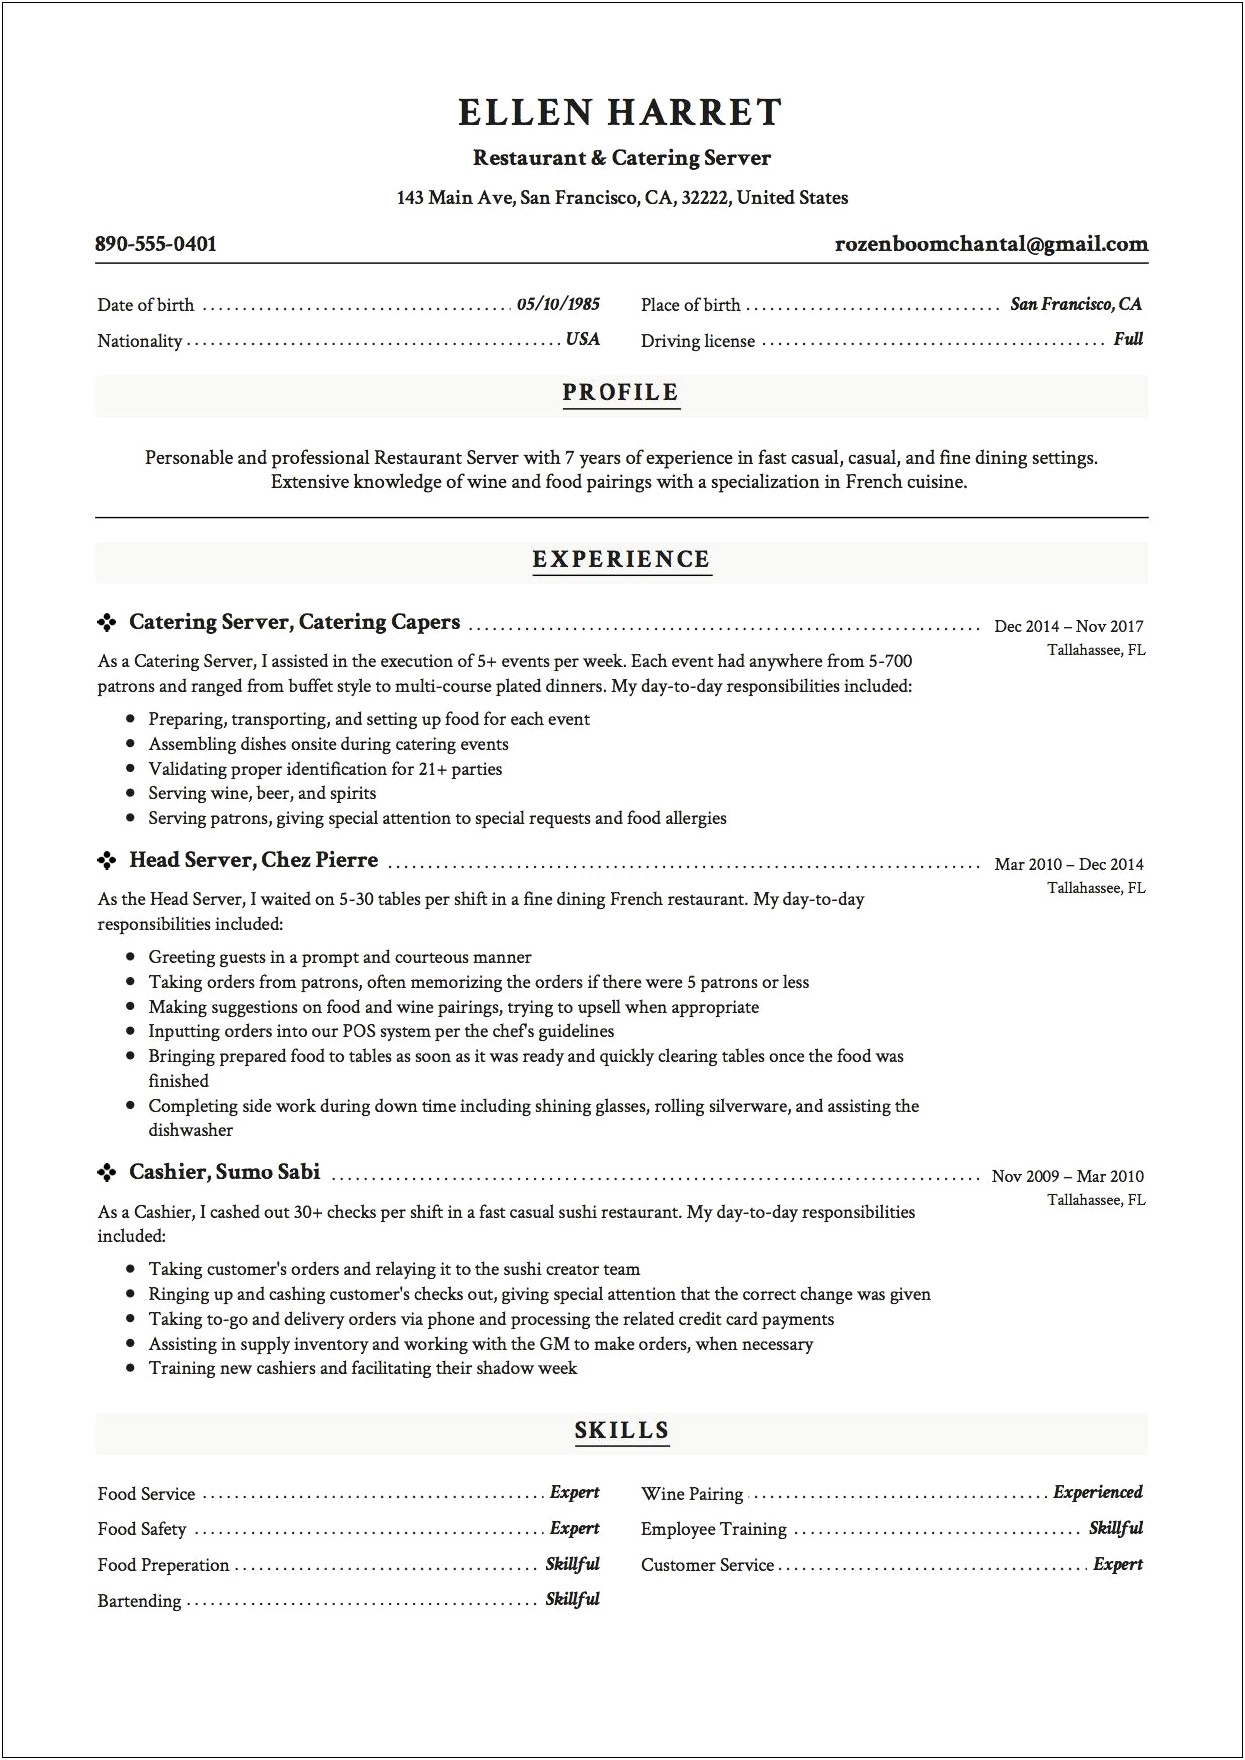 Word Downloadable Resume Templates For Restaurant Servers